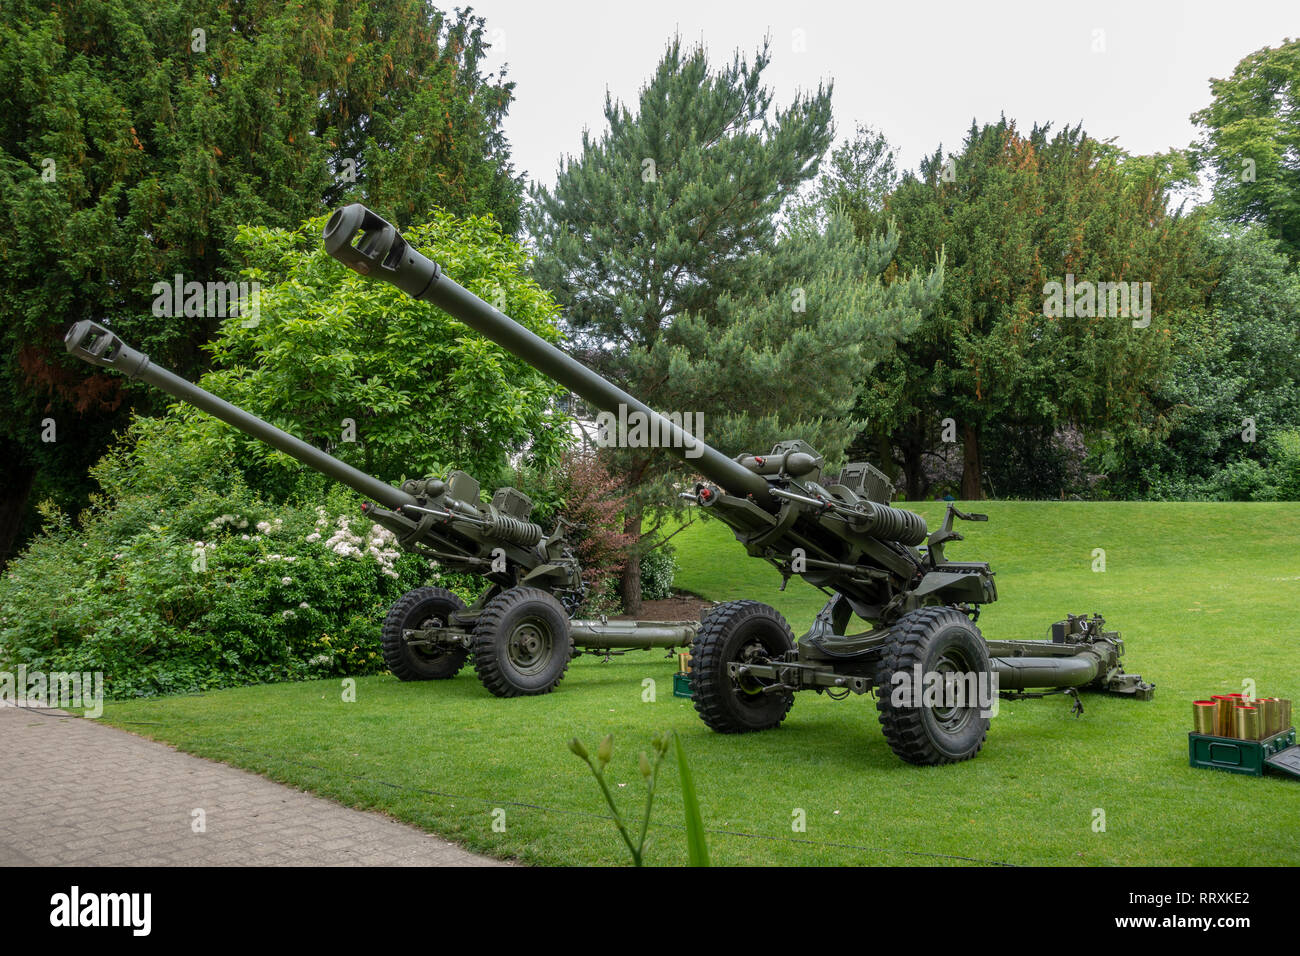 A pair of L118 Light Guns, a 105 mm towed howitzer used for the Royal Salute in June 2018, Museum Gardens, City of York, UK. Stock Photo